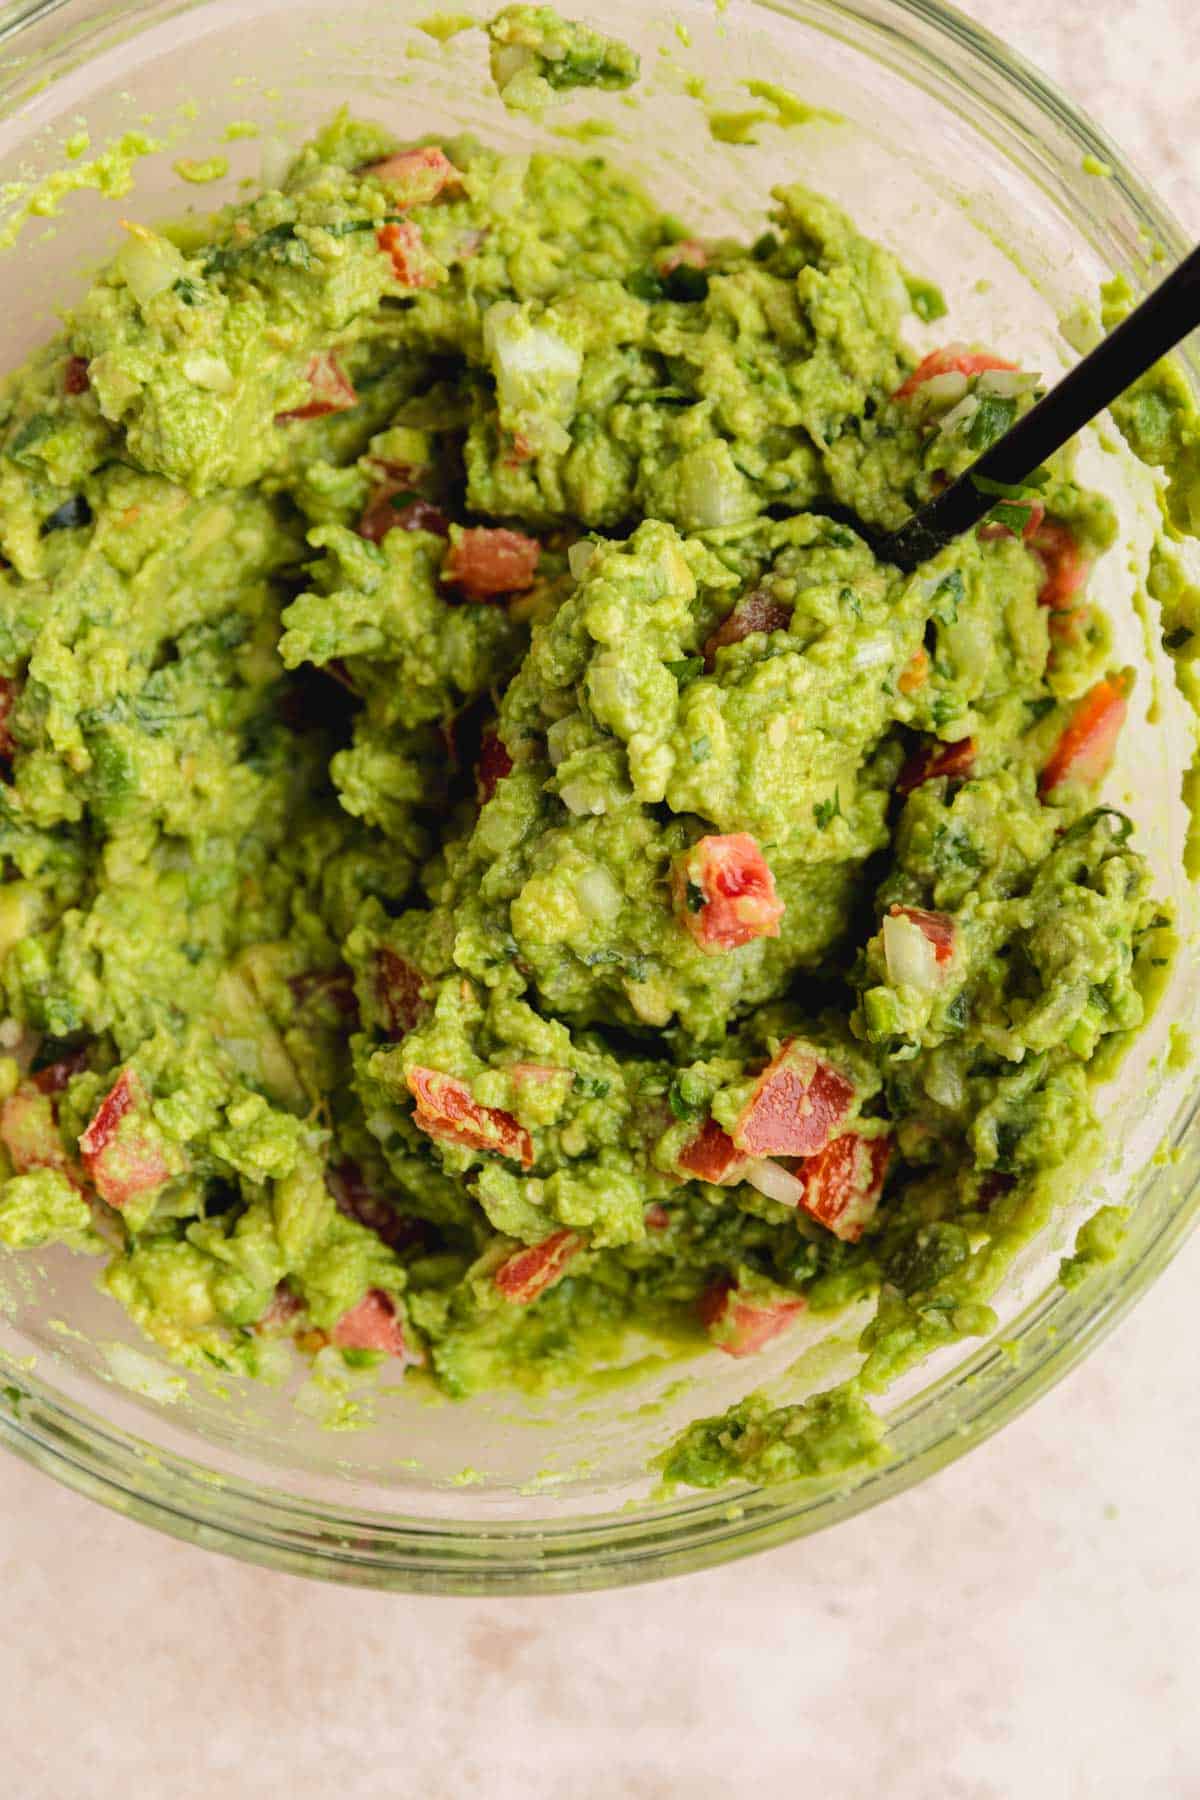 All guacamole ingredients mixed together in a bowl.